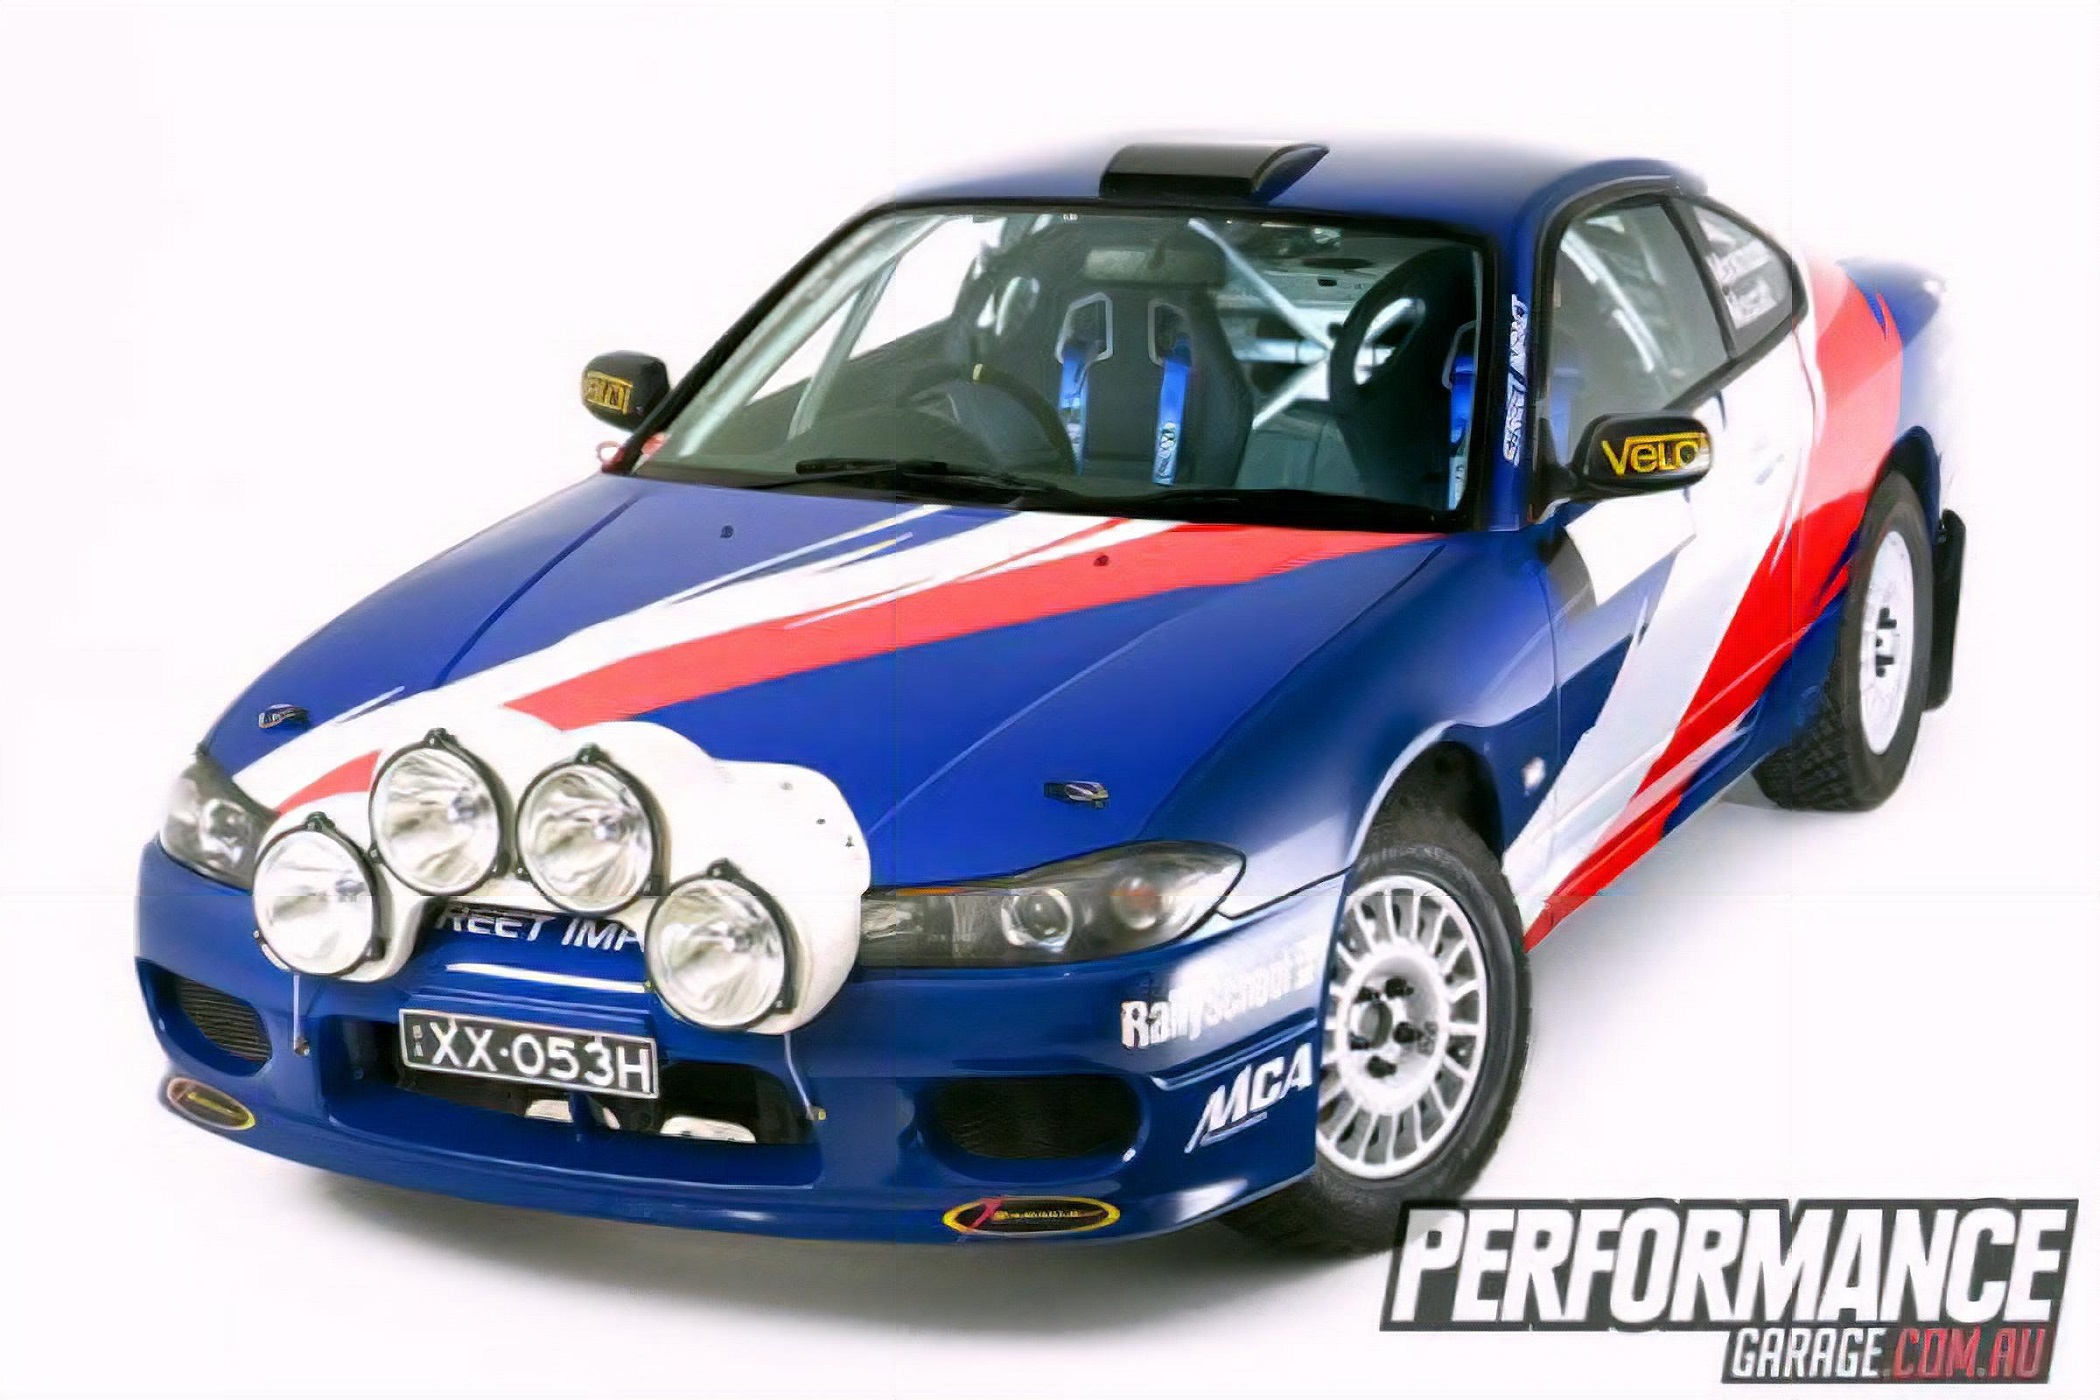 World's First S15 Rally Car